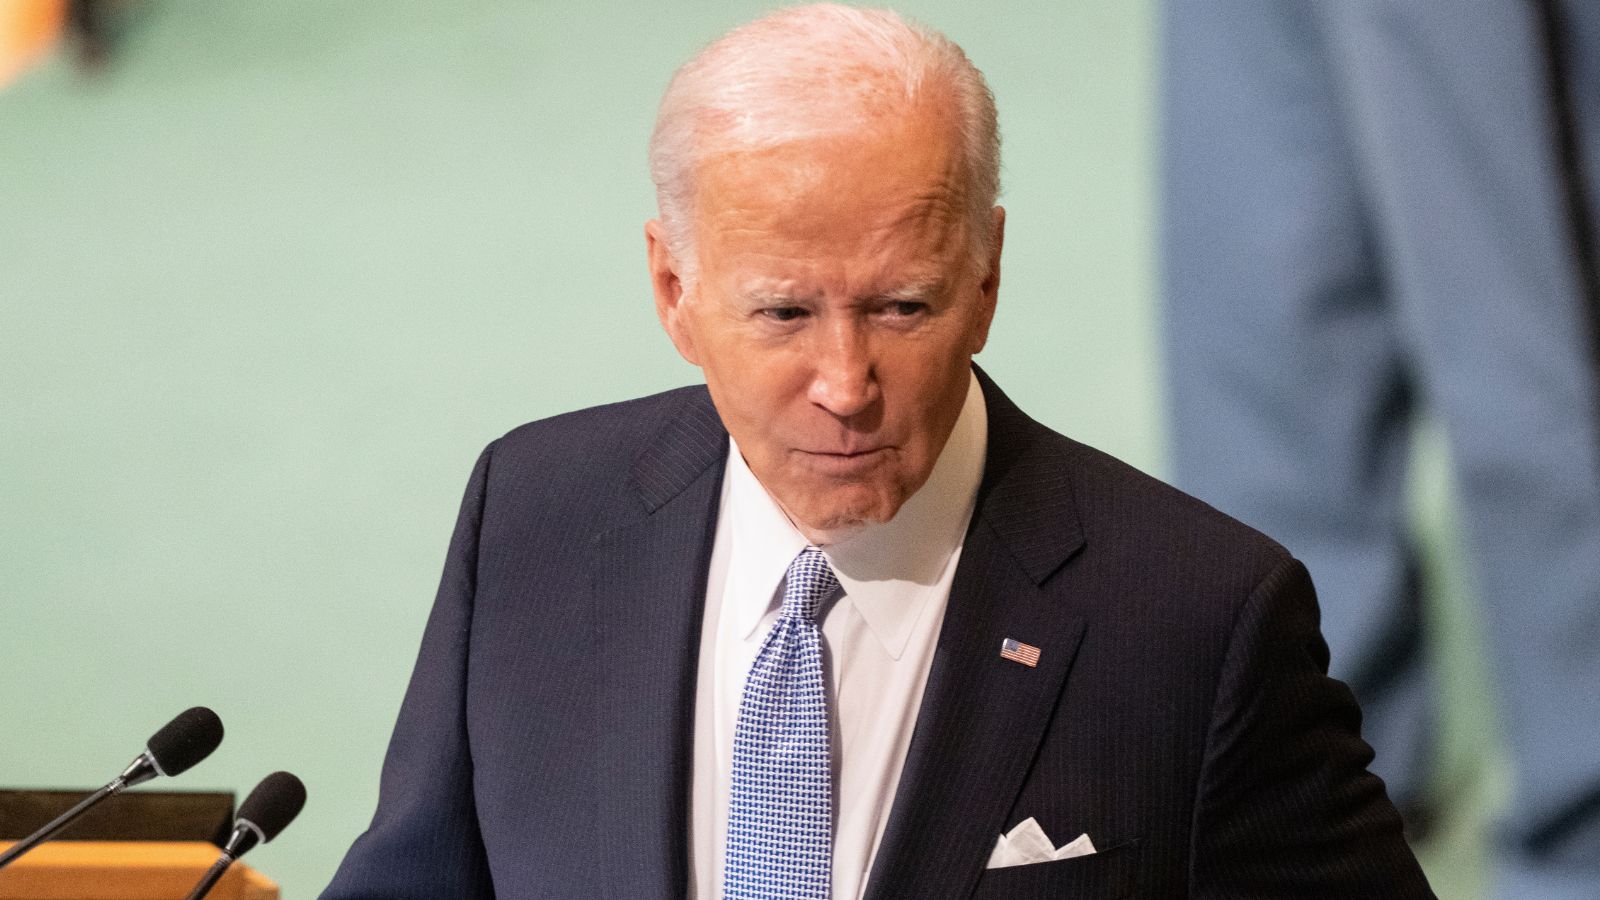 “Biden Talks of Unity, Yet He Has Divided Us” – POTUS Criticized for Hypocritical Thanksgiving Message